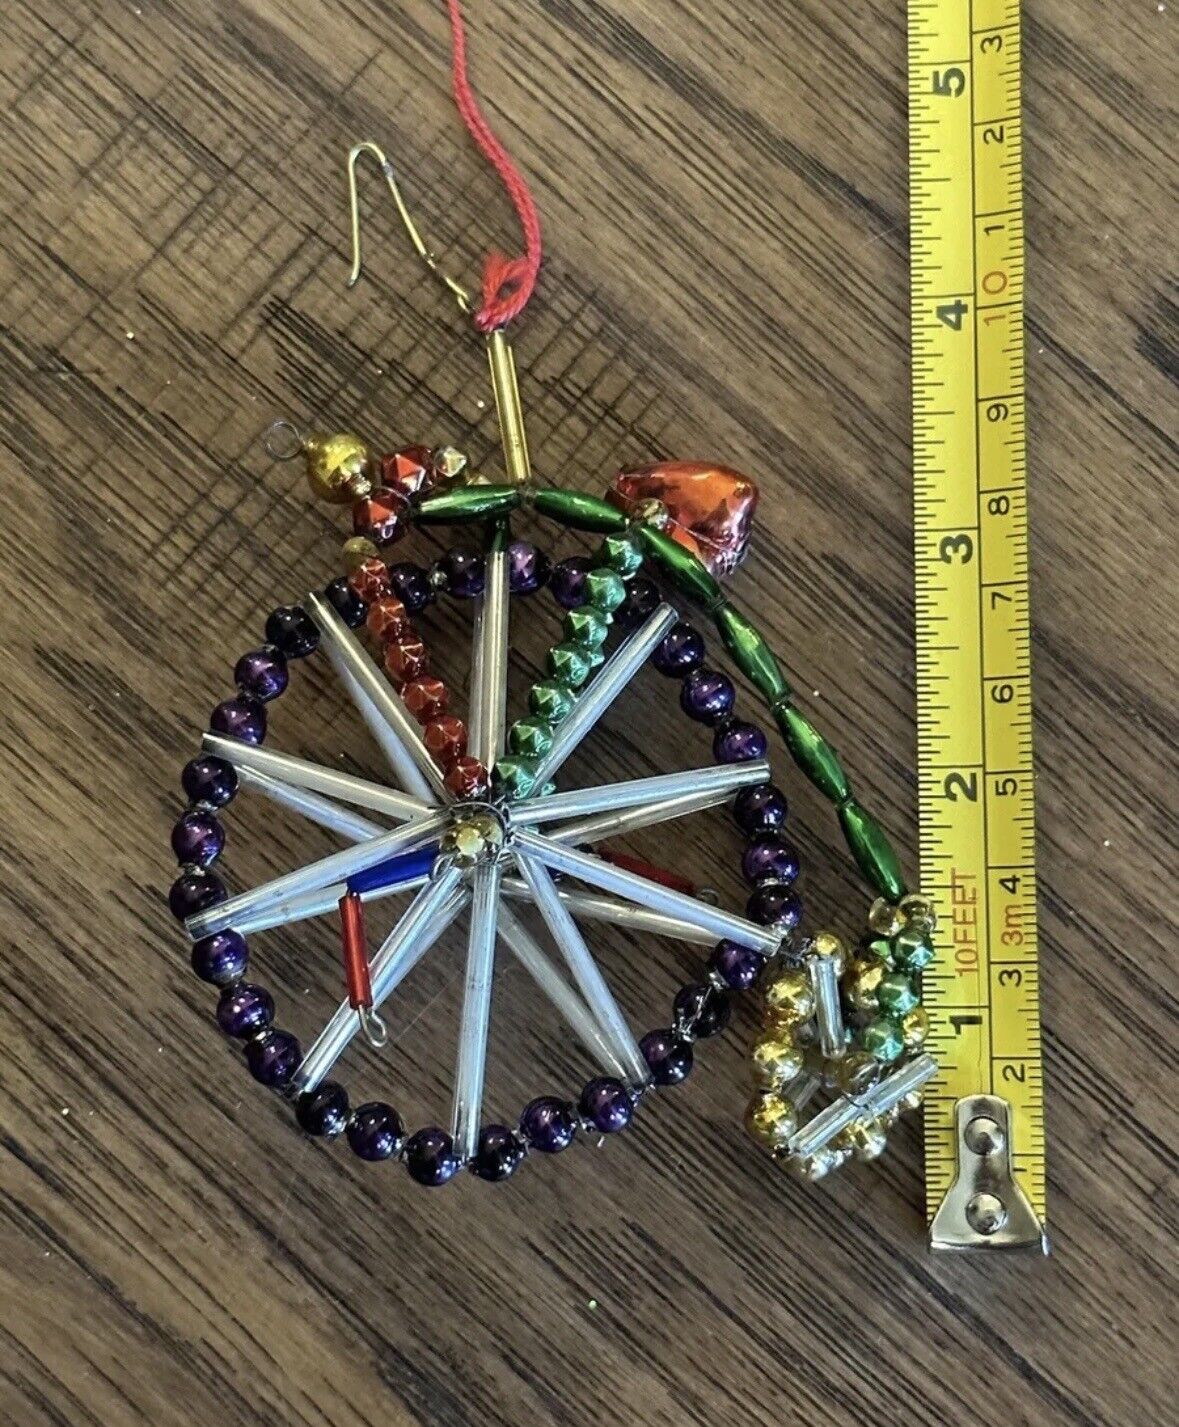 Christopher Radko Unicycle Bicycle Beaded Christmas Ornament Build For One